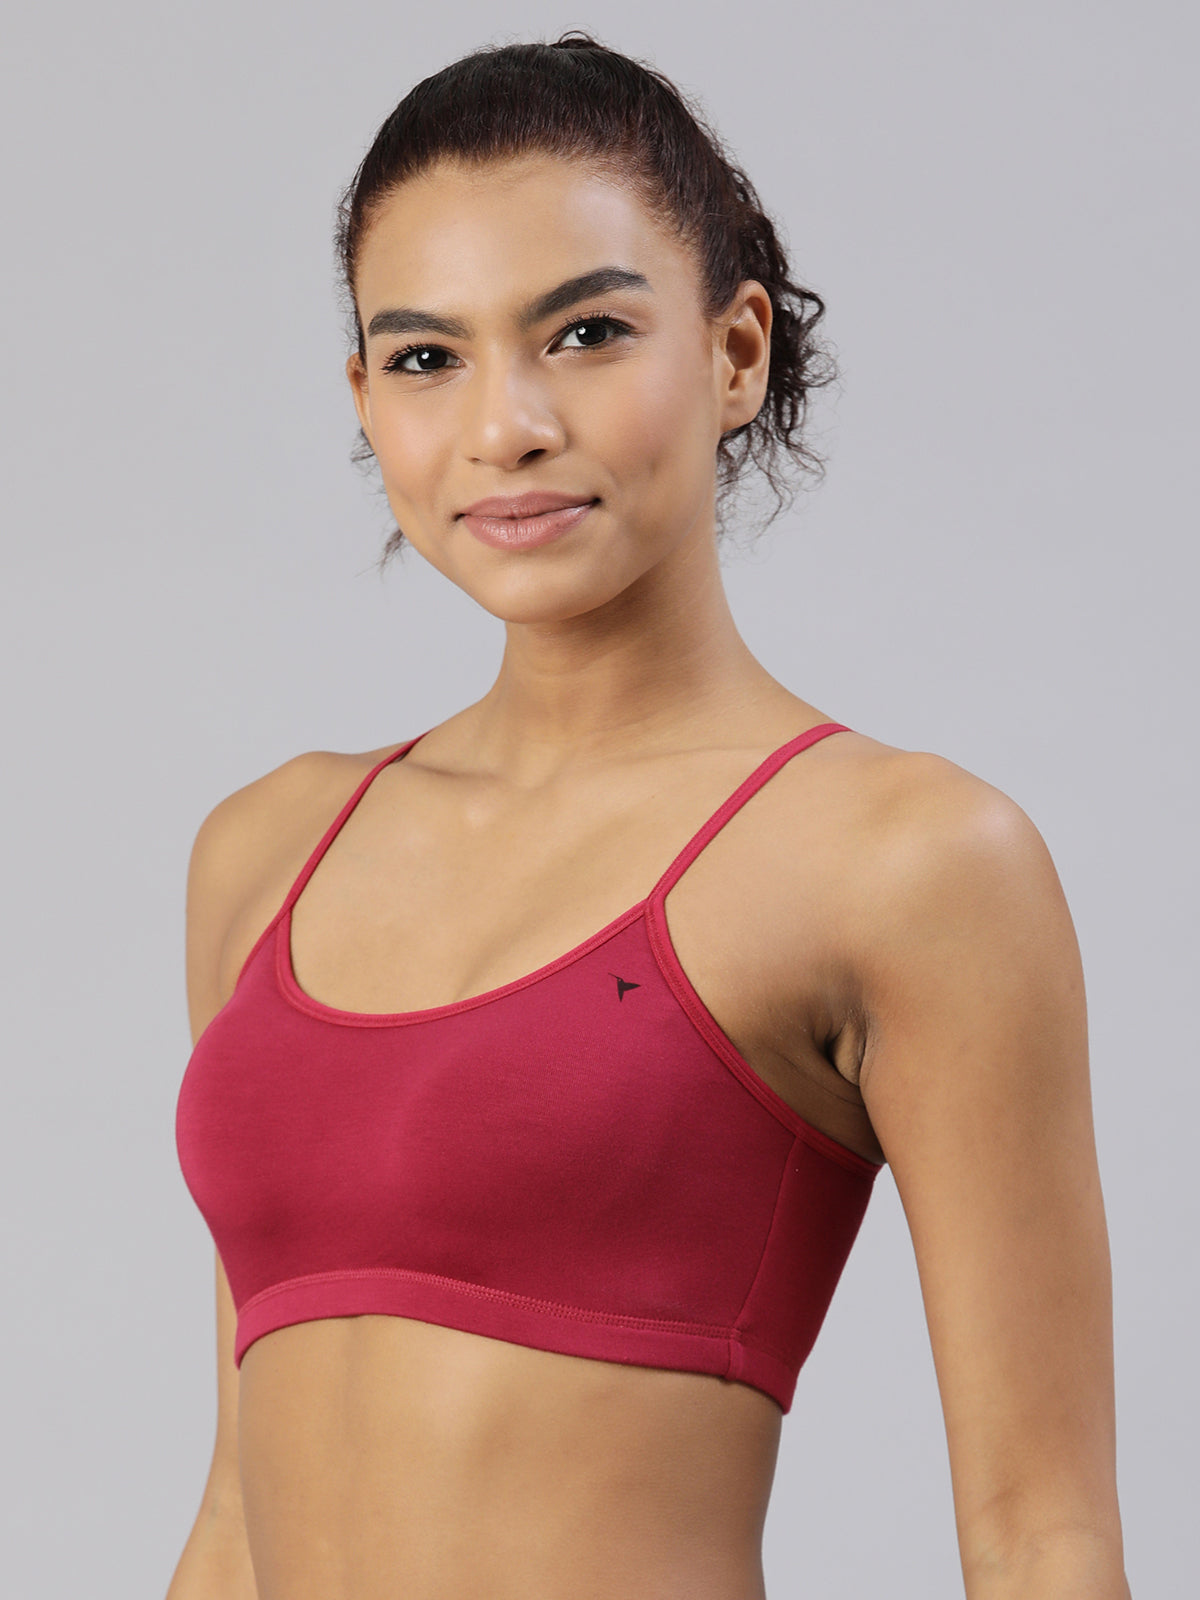 blossom-starters bra-red wine3-teen collection